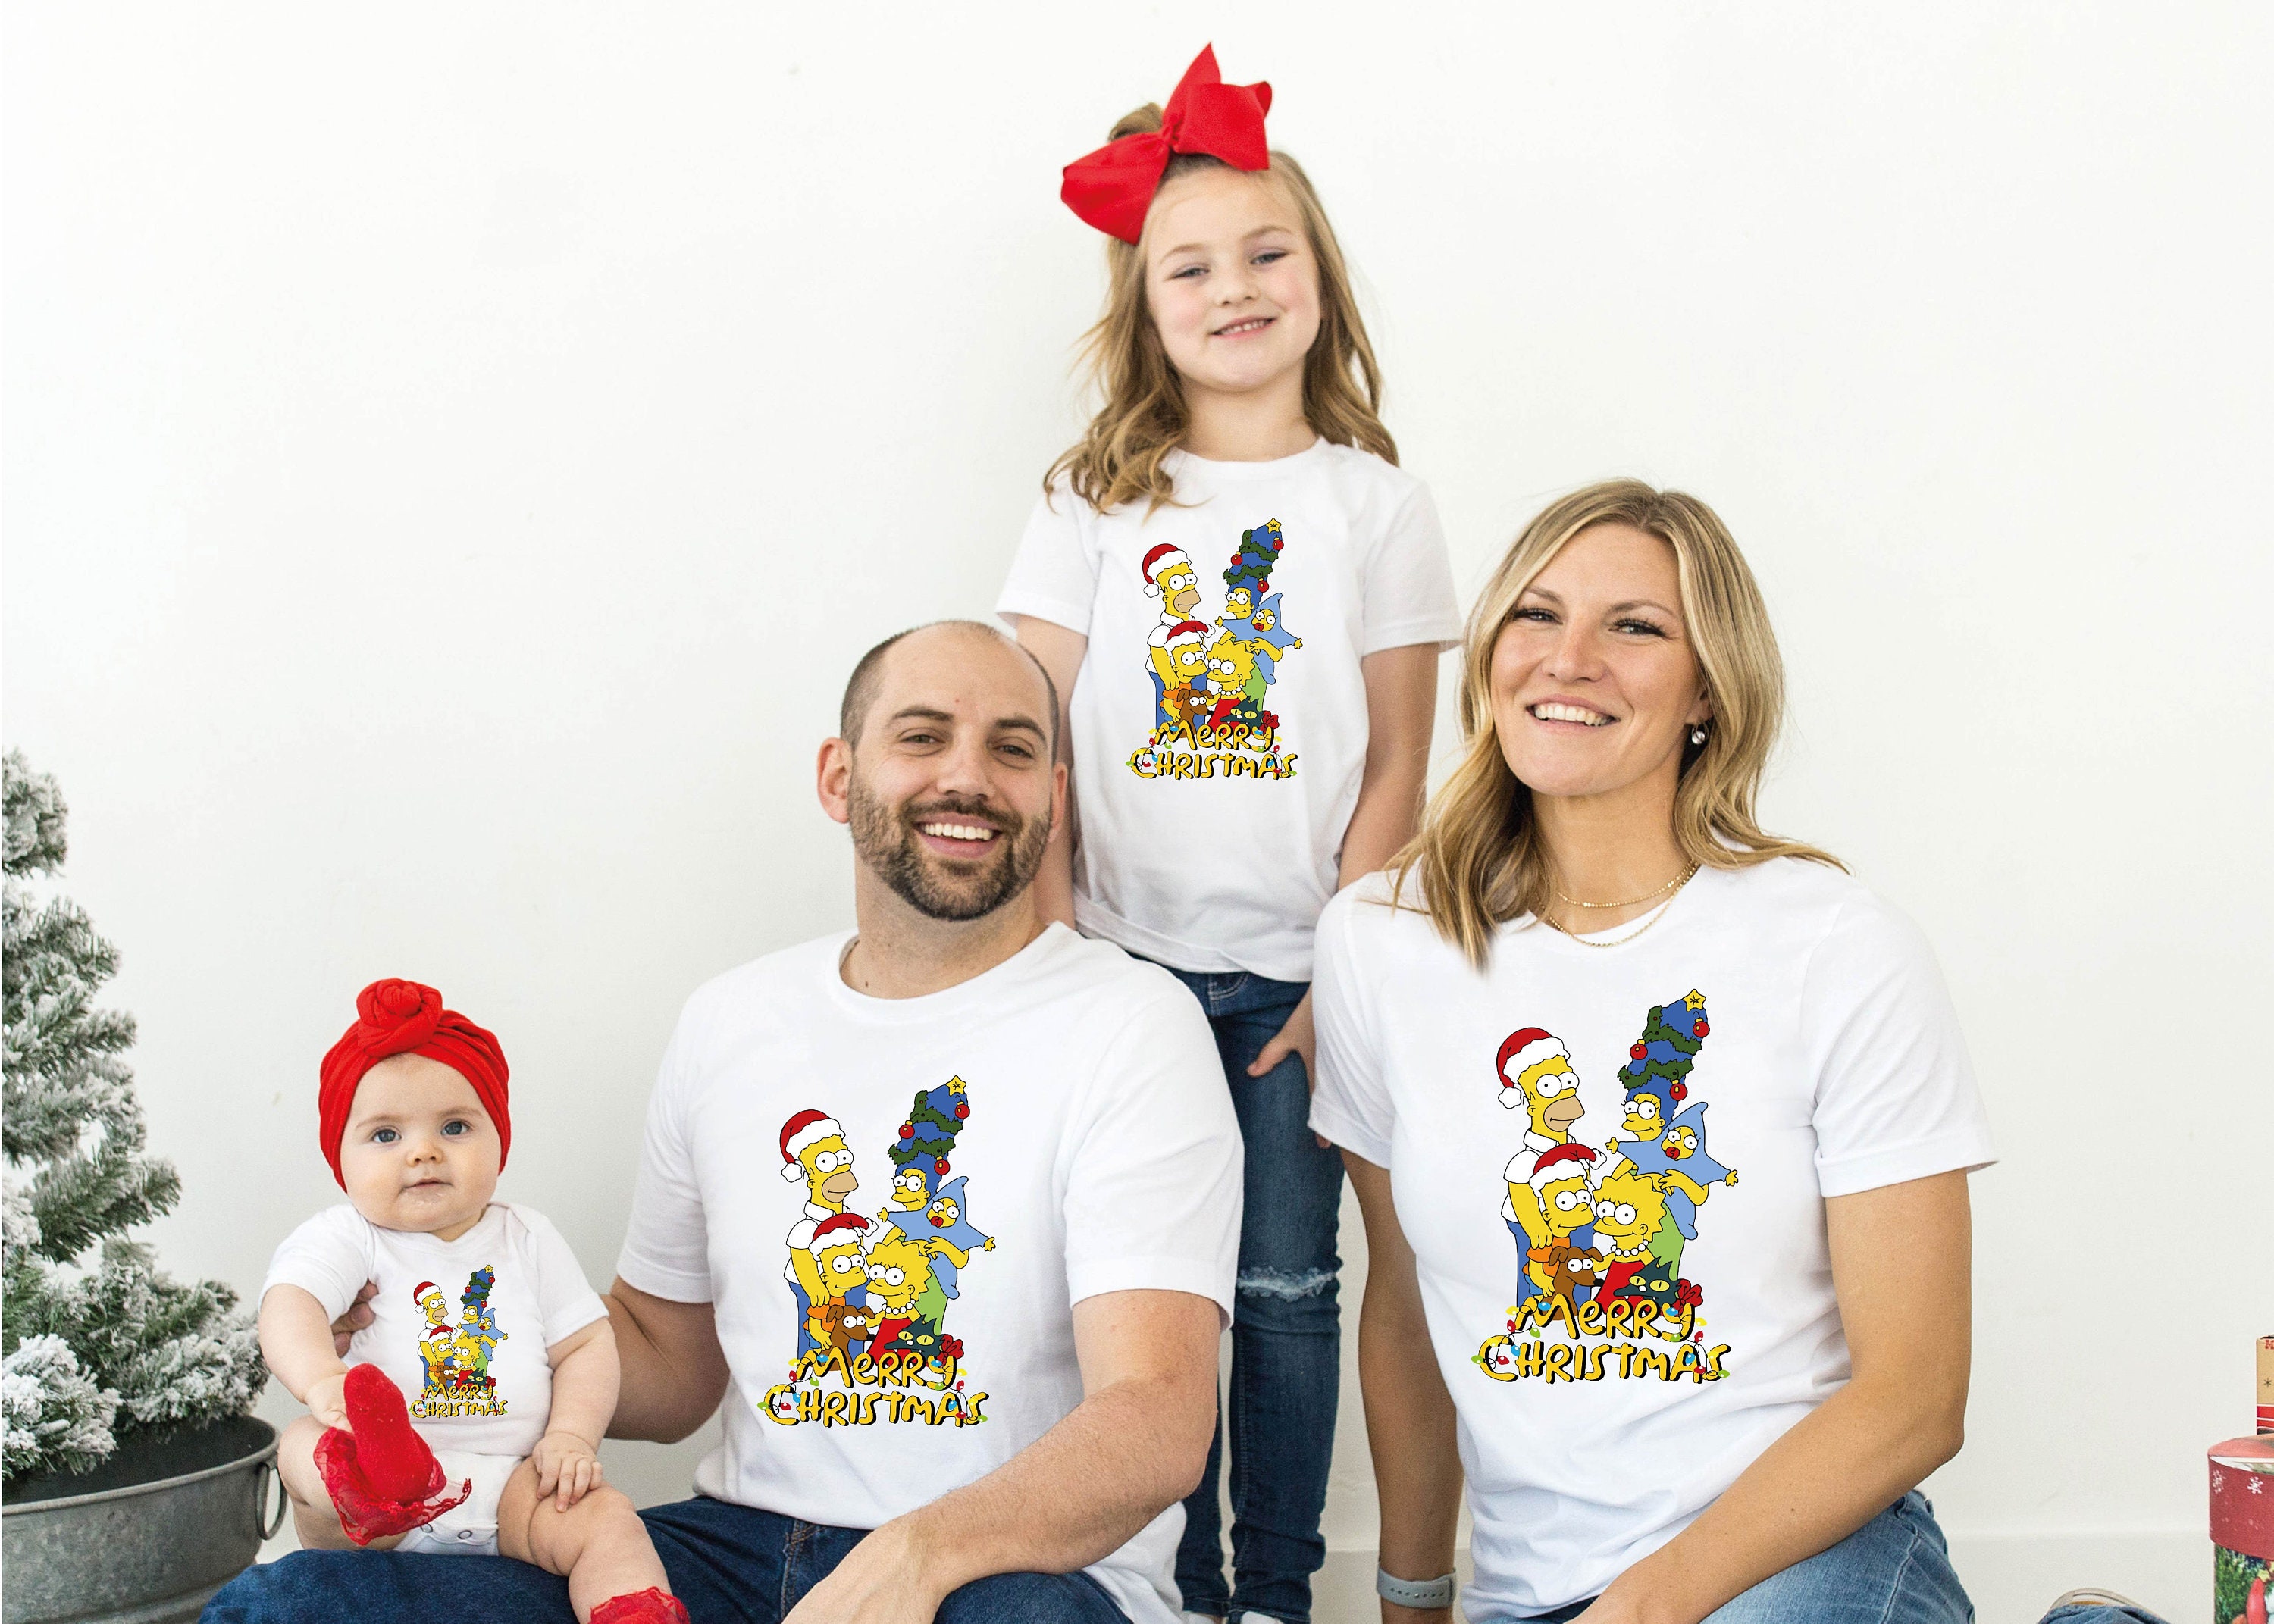 the Merry T Christmas Family Family for Group - Christmas Etsy Vibes, Christmas, Shirt Christmas Gift Matching Simpsons Shirt, Christmas Tee,